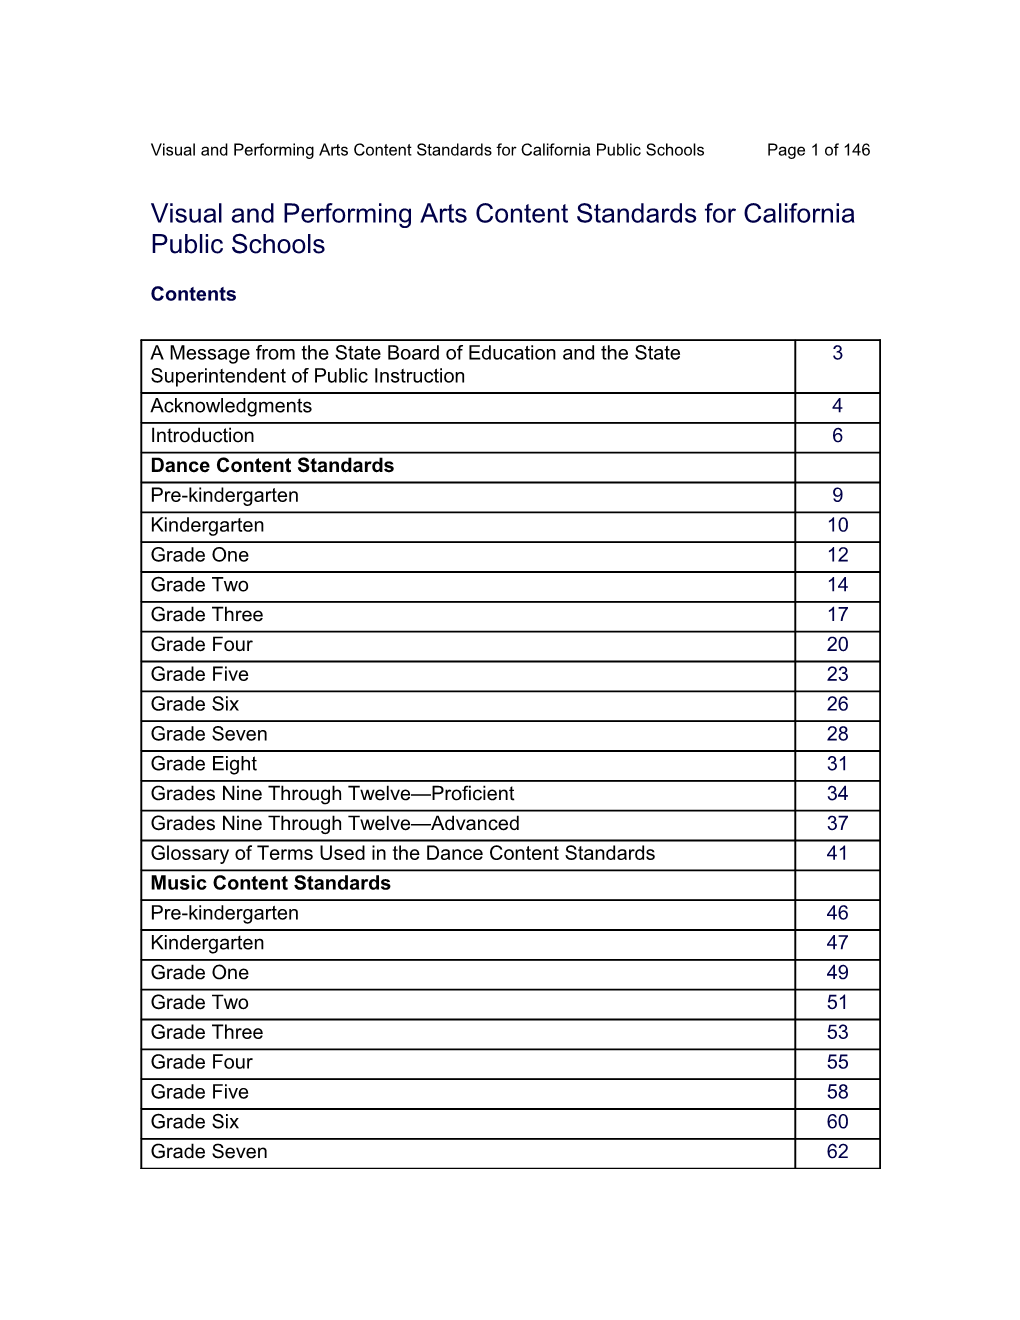 Visual and Performing Arts Content Standards - Curriculum Frameworks (CA Dept of Education)